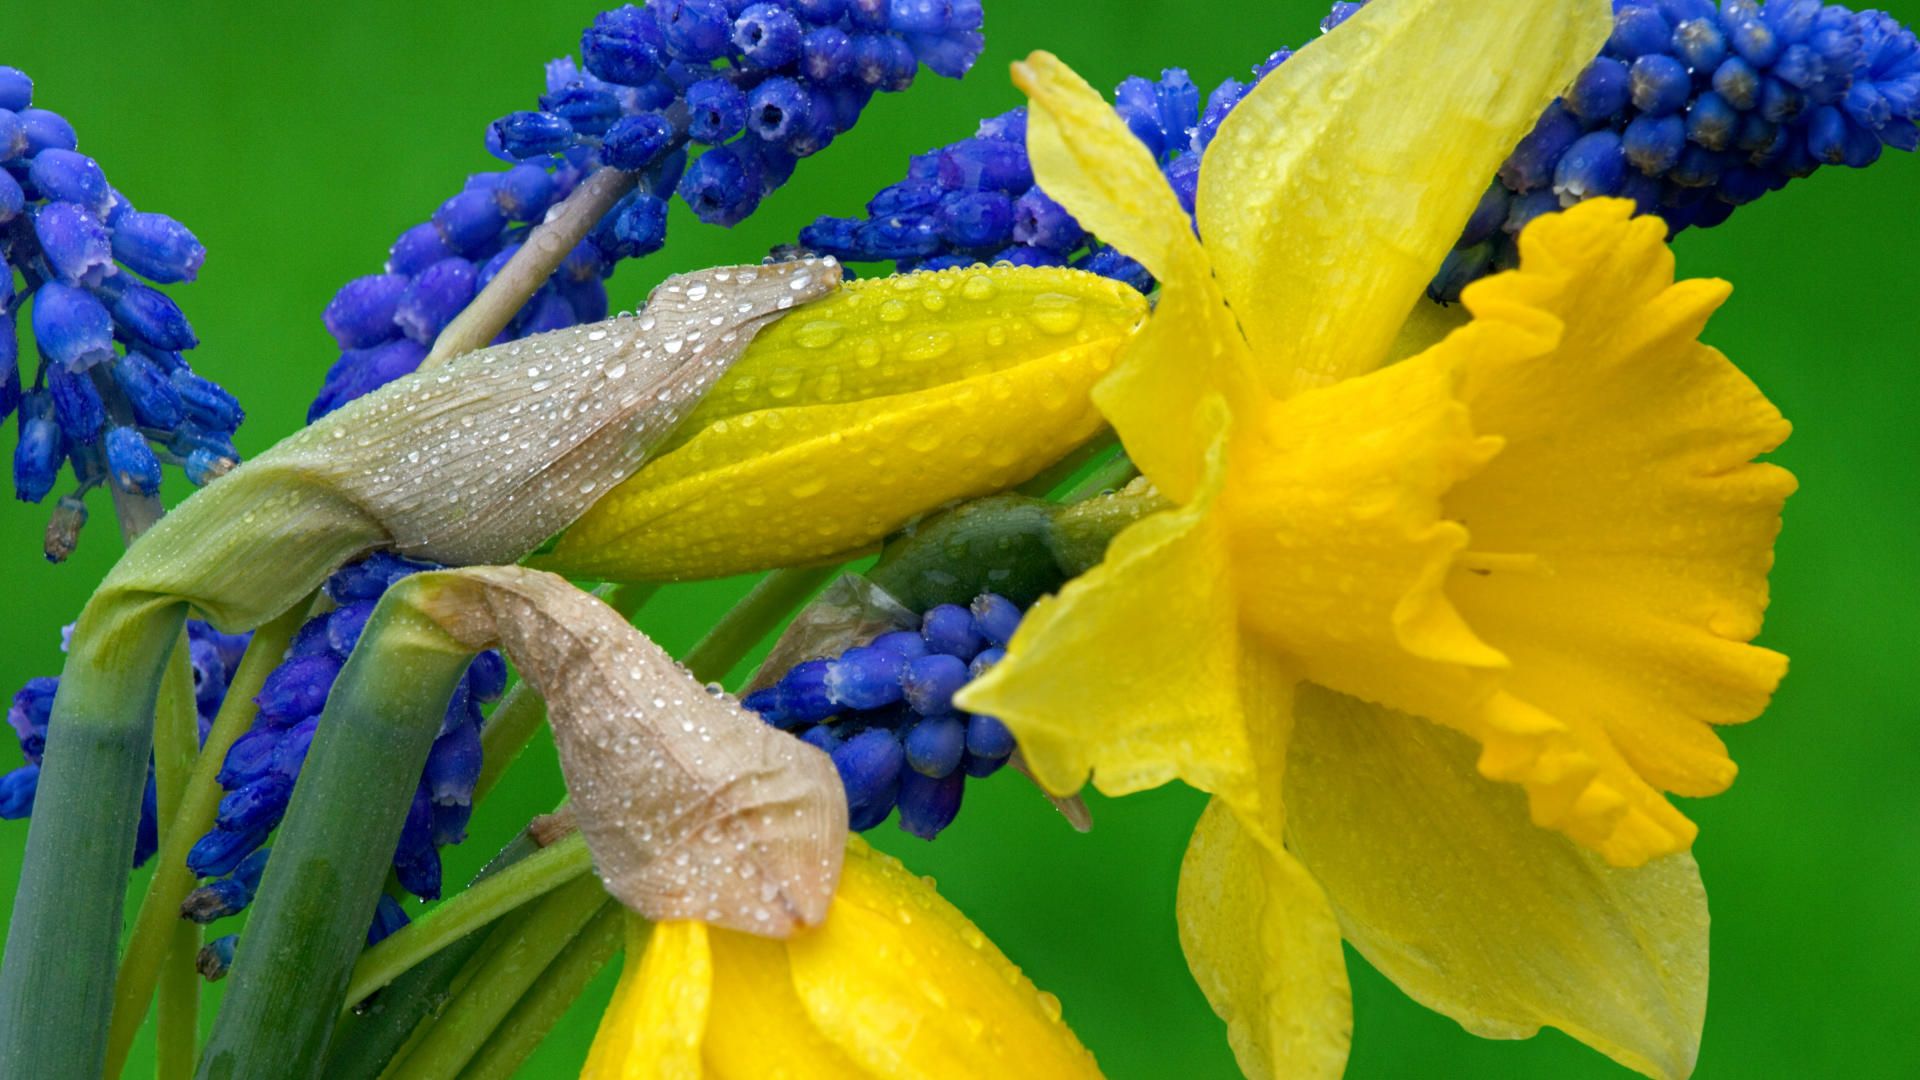 Download 1920x1080 Daffodil and Hyacinth Wallpaper